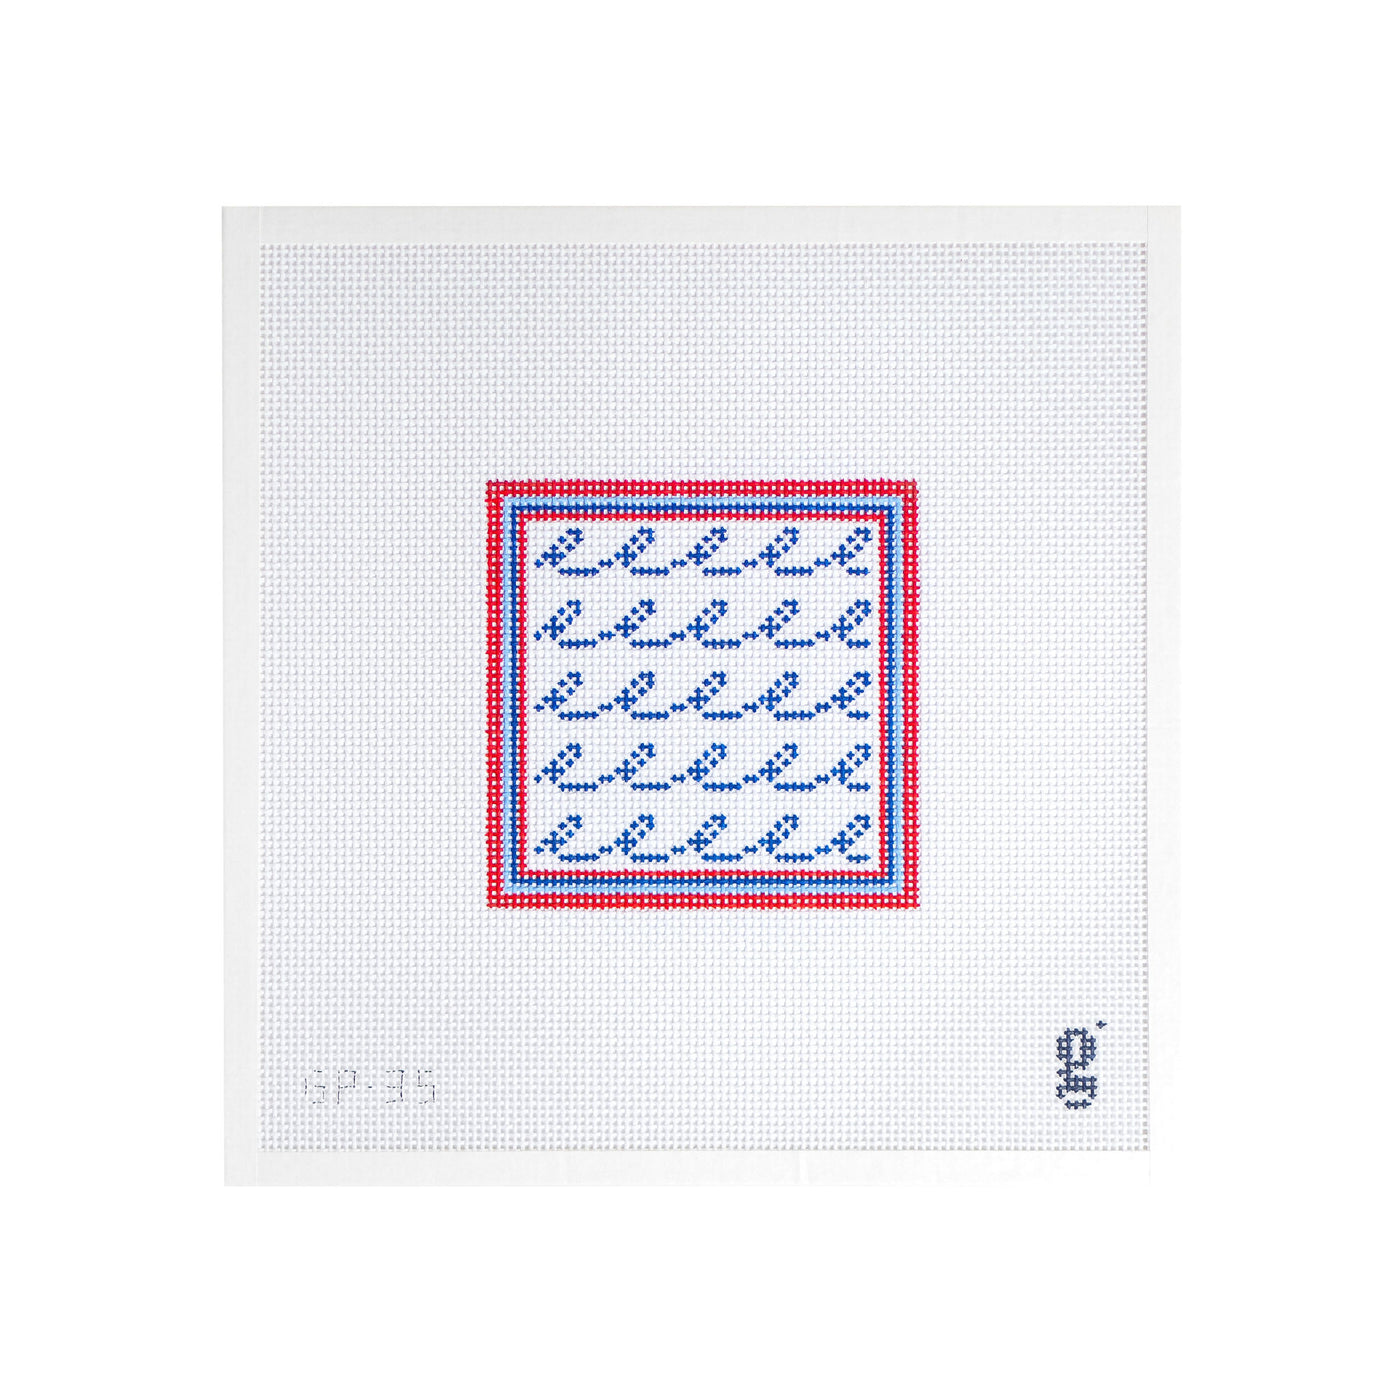 White square shaped needlepoint canvas. A red, light blue and navy striped border frame 5 rows of navy squiggles. The goodpoint logo is at bottom right corner and the SKU is at bottom left corner.